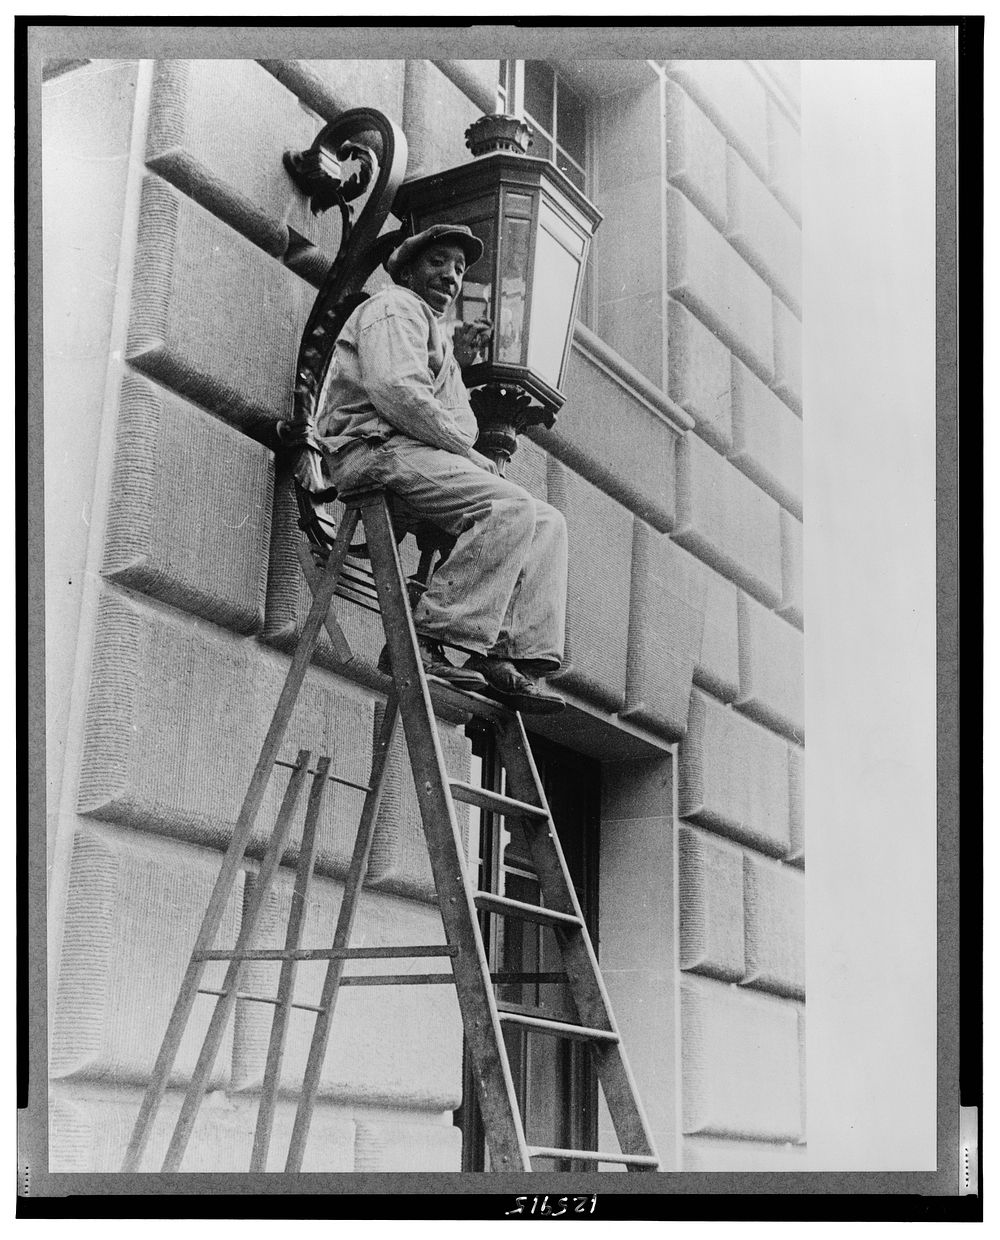 Washington, D.C. A government laborer on a stepladder cleaning a lamp above the entrance of the Commerce(?) building.…